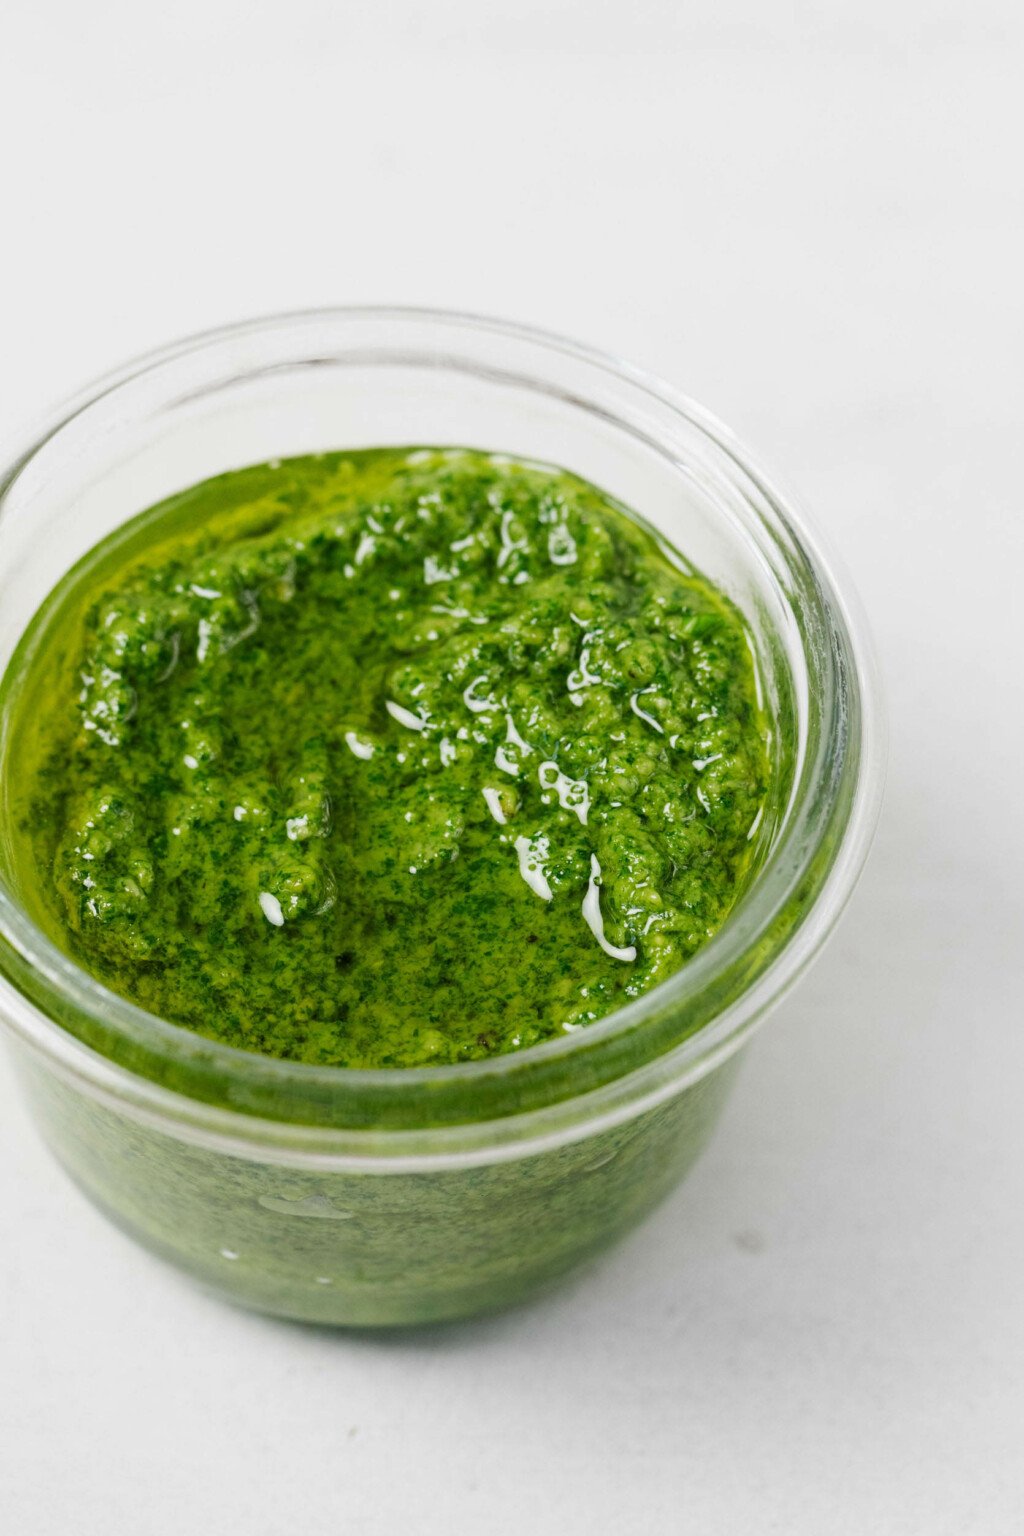 A glass mason jar rests on a white surface. It has been filled with a bright green vegan pesto.